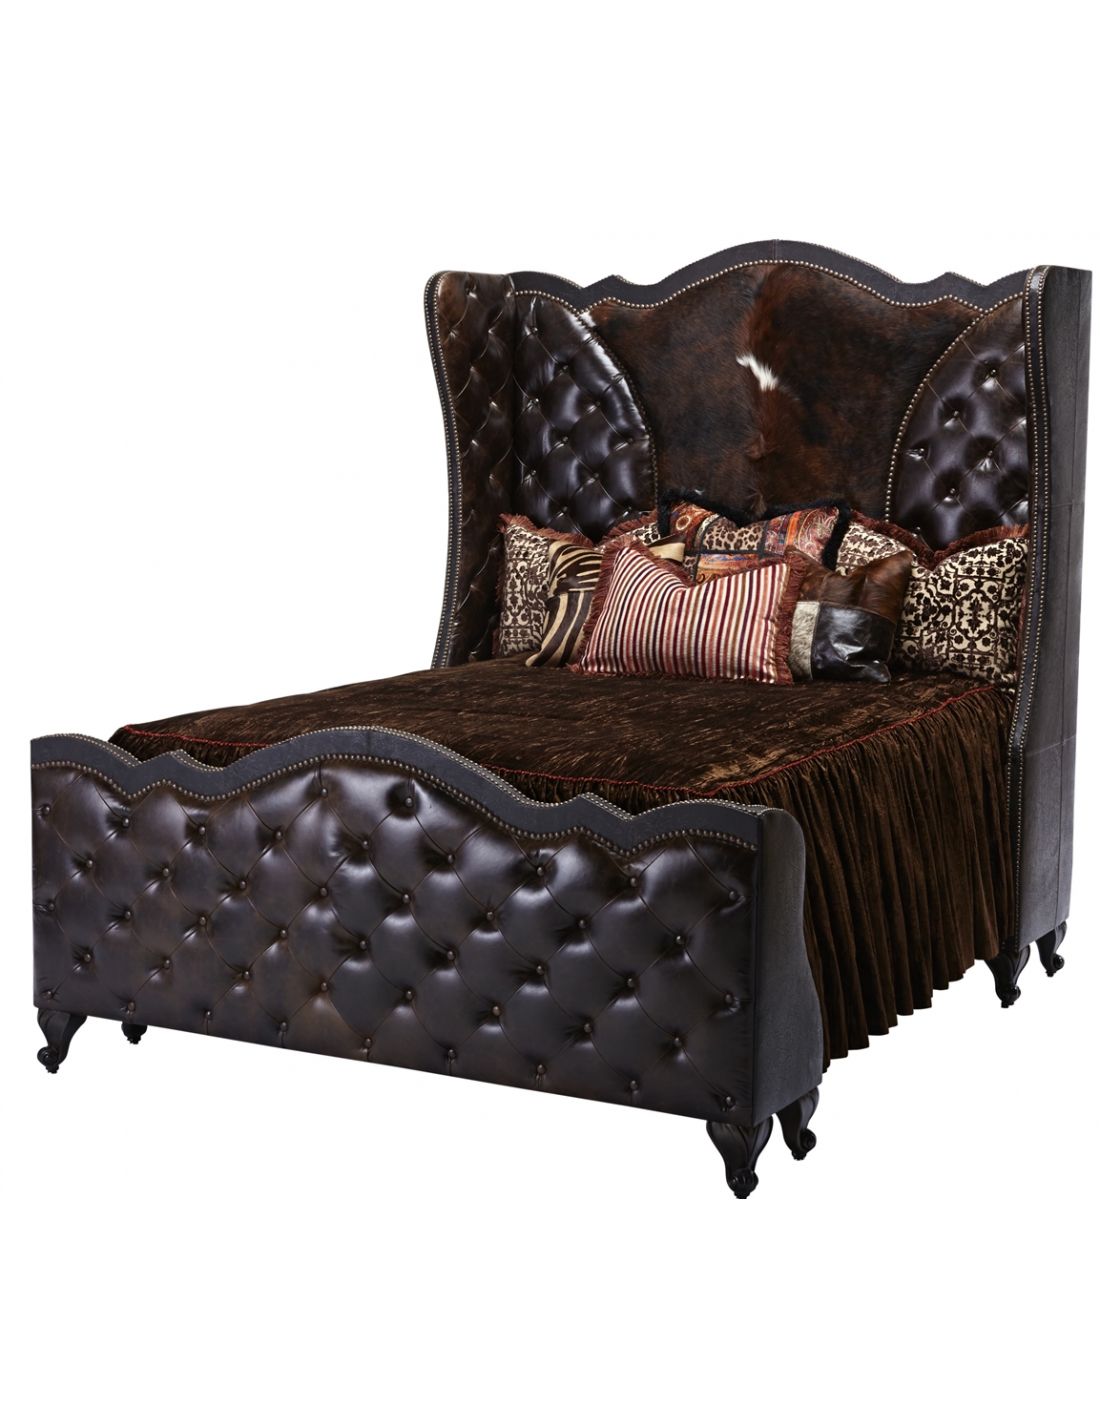 Grand Tufted Headboard With Wingback, Fabulous Baroque King Bed